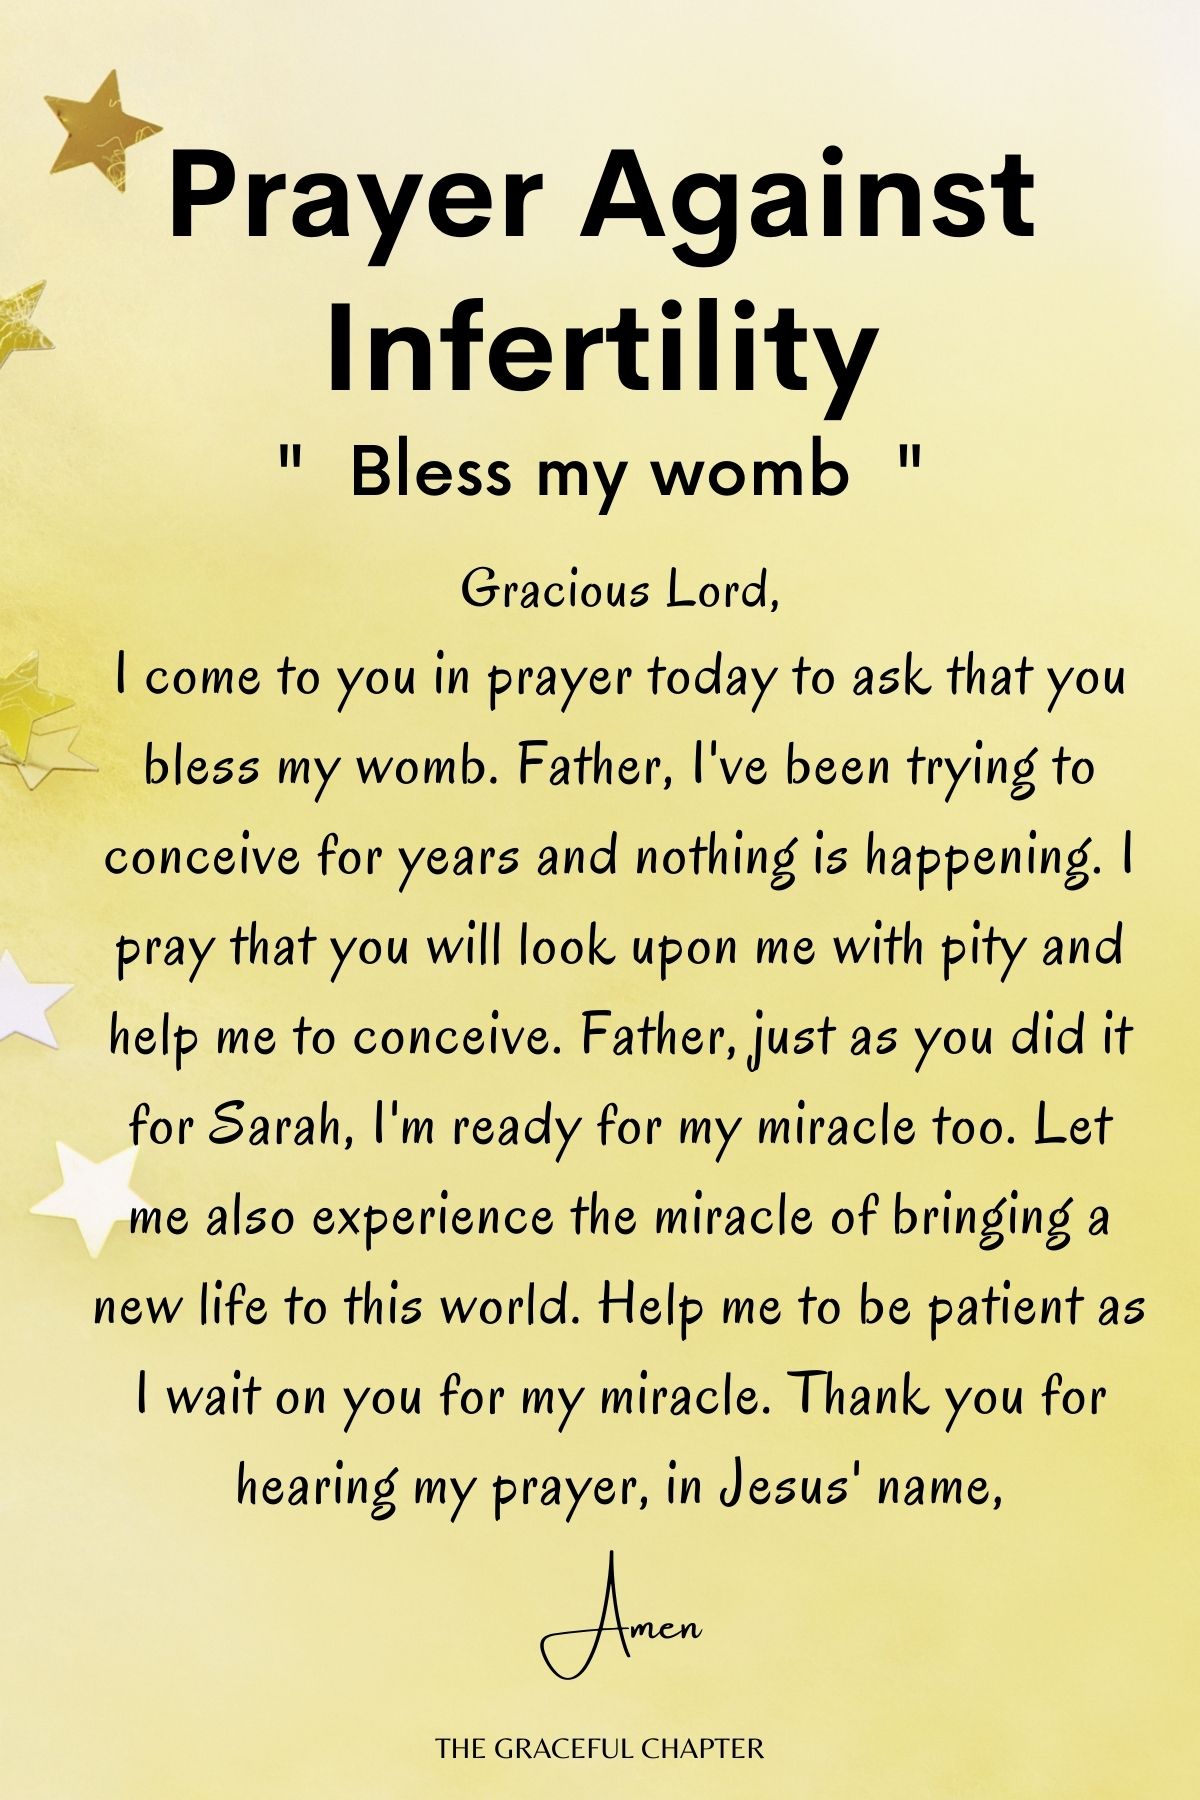 Prayers against infertility and barrenness